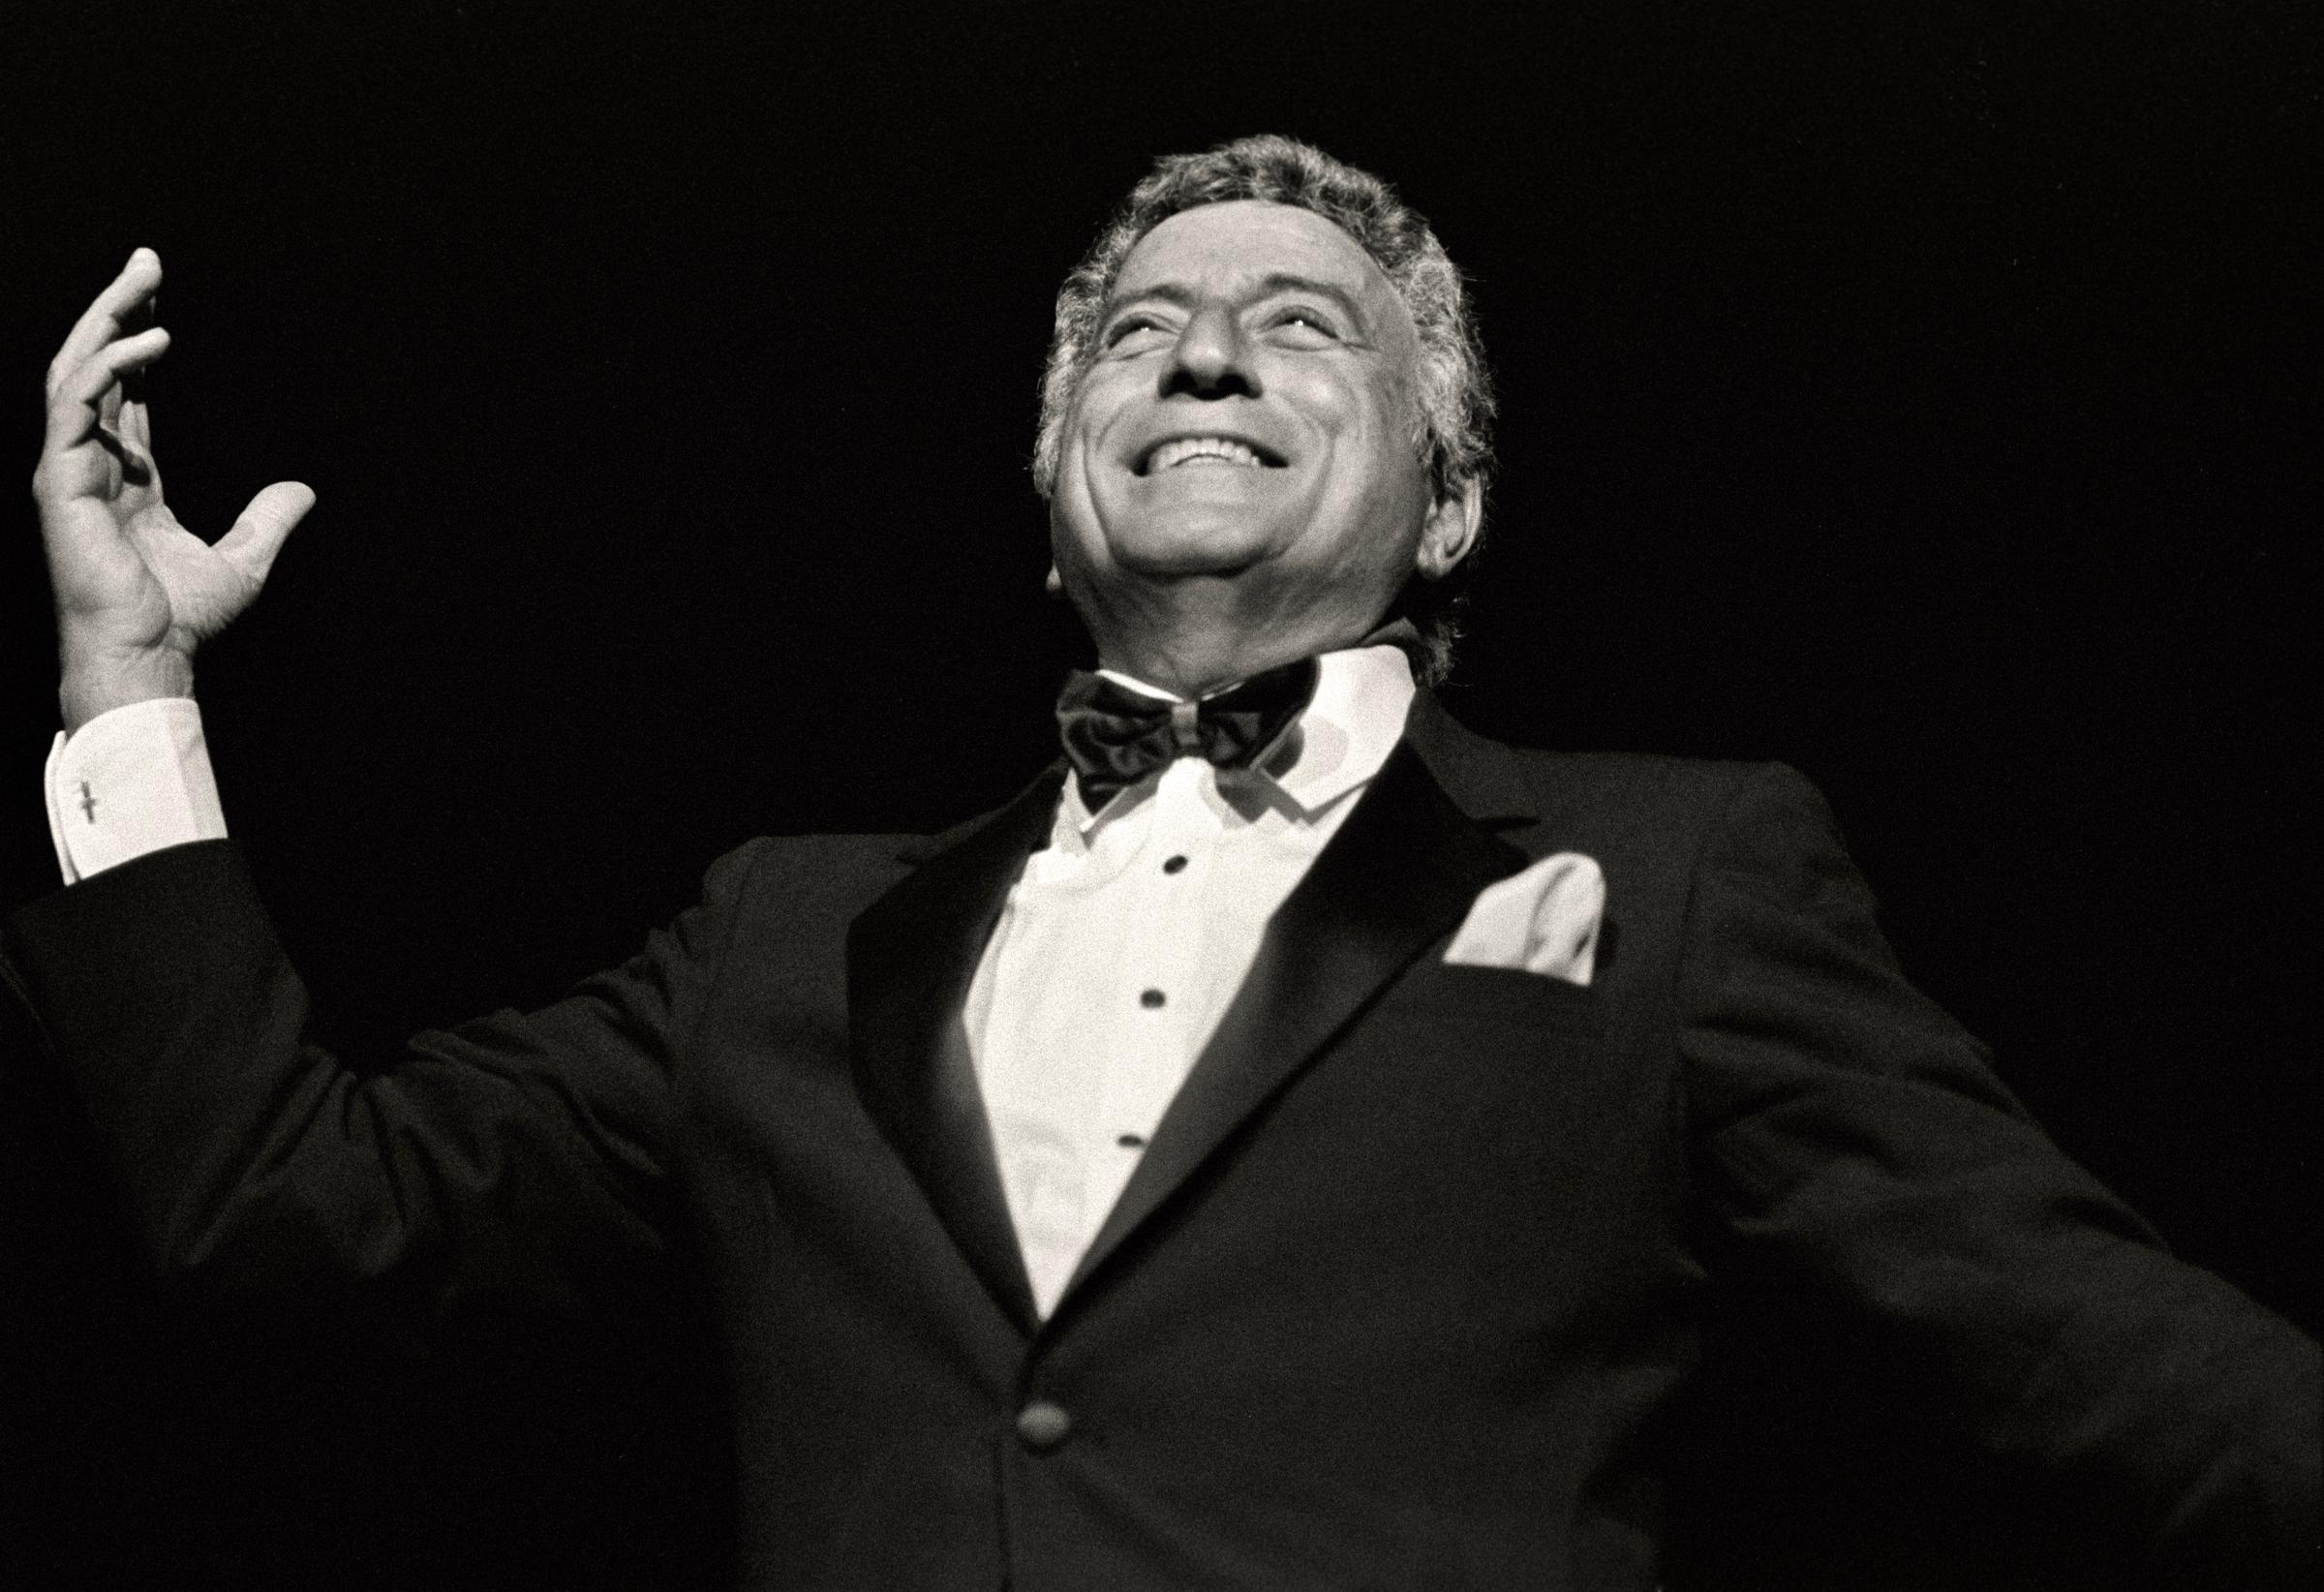 Tony Bennett performing live on October 4, 1991, in Cheyenne, Wyoming. | Source: Getty Images